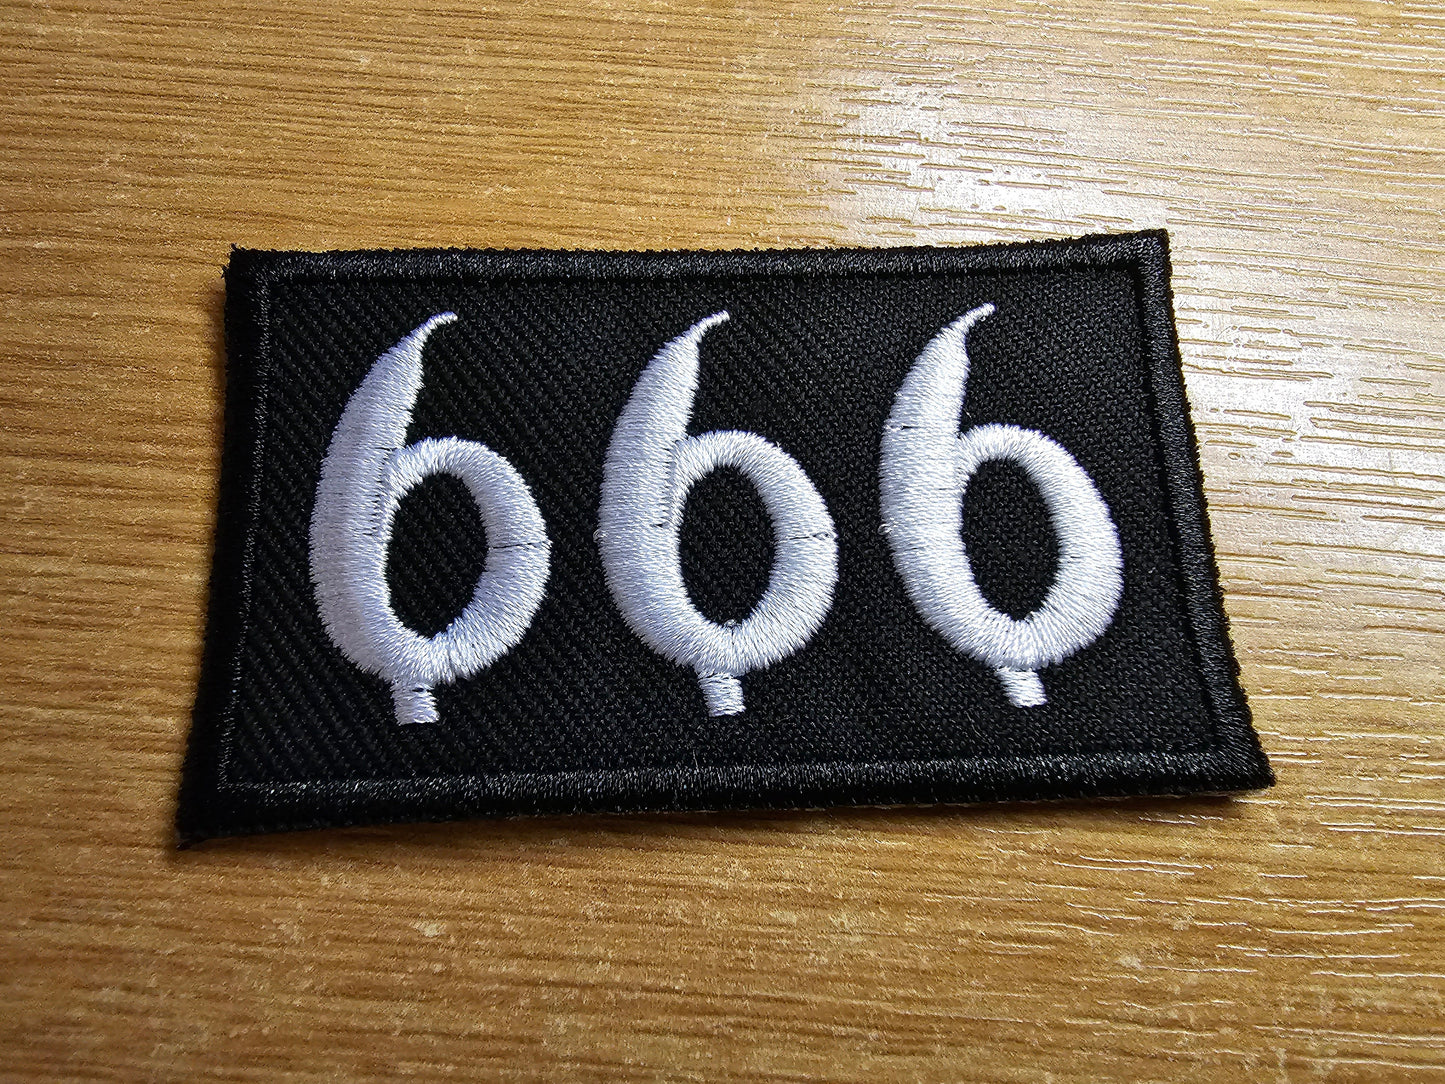 666 Goth Iron On Embroidered Patch